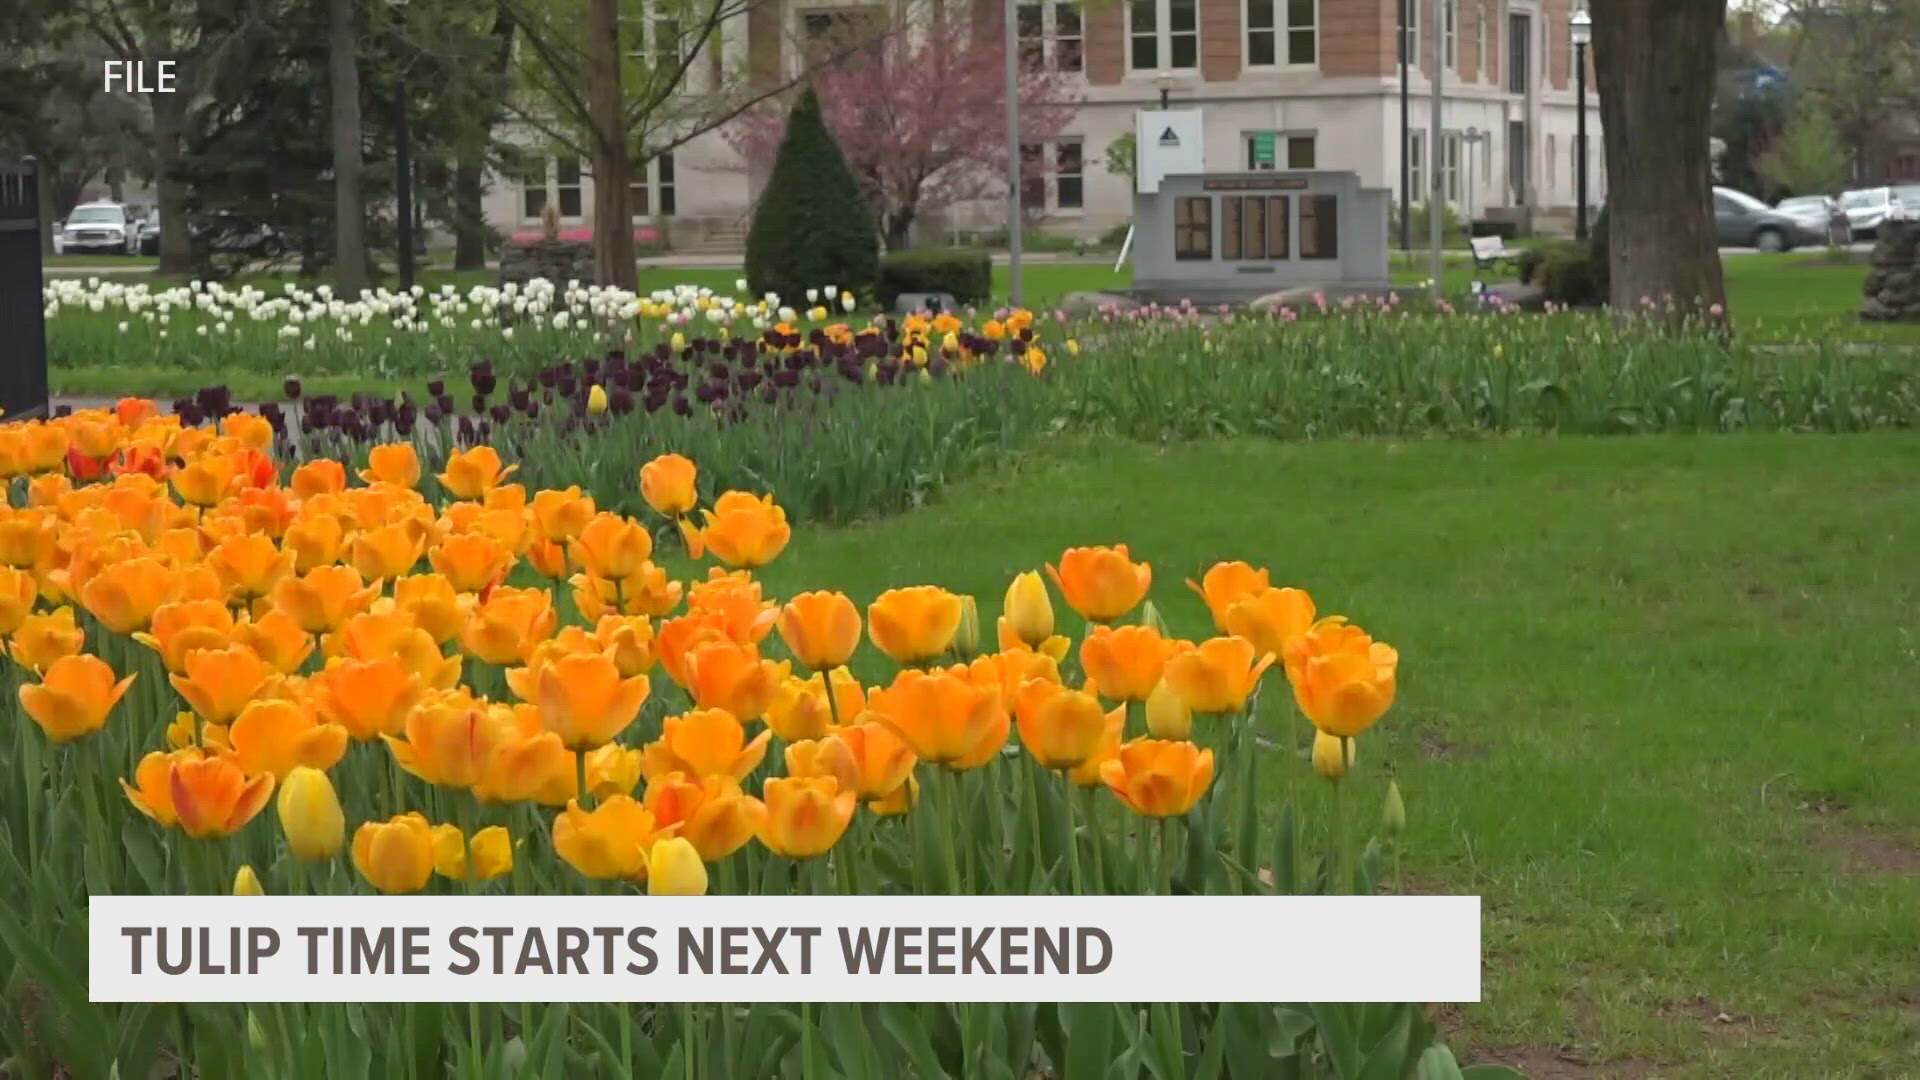 Tulip time runs from May 4th to the 12th.